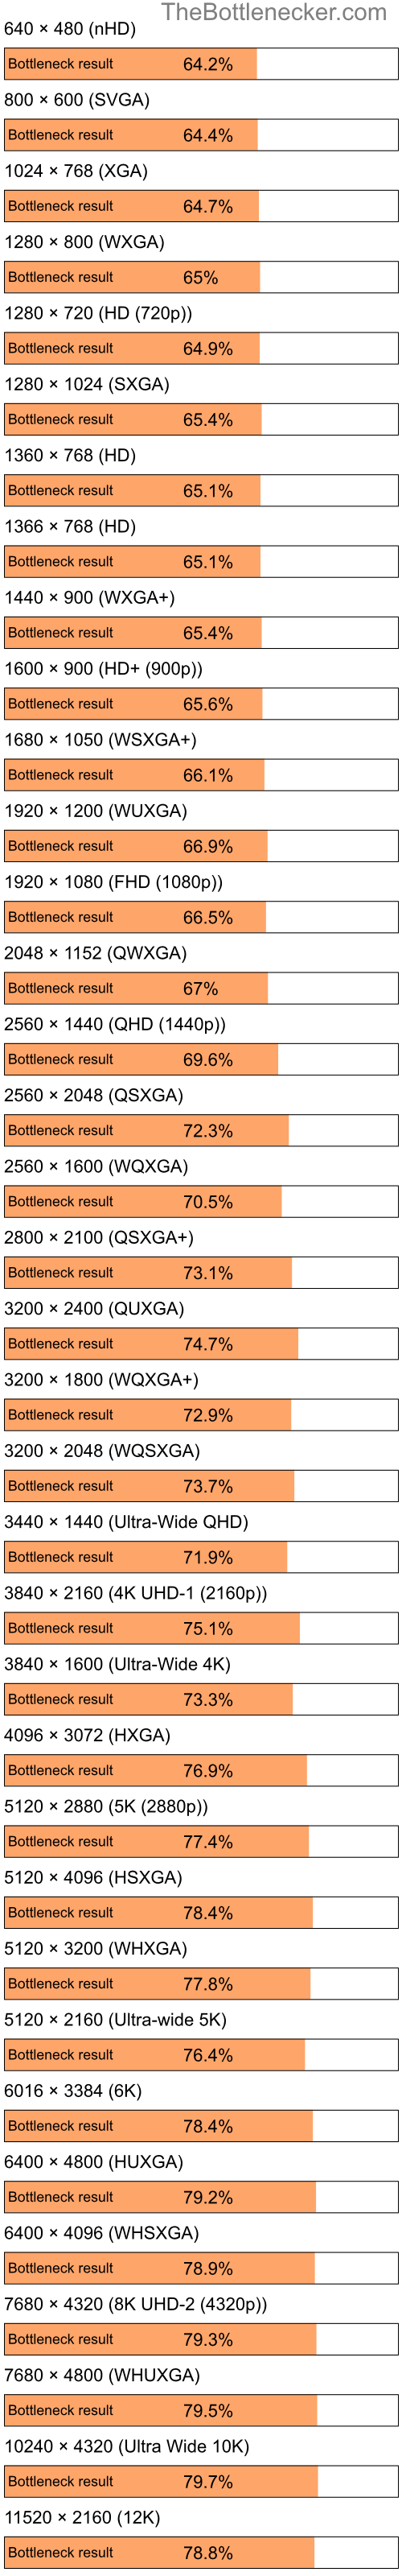 Bottleneck results by resolution for Intel Pentium 4 and NVIDIA GeForce 7100 GS in Processor Intense Tasks